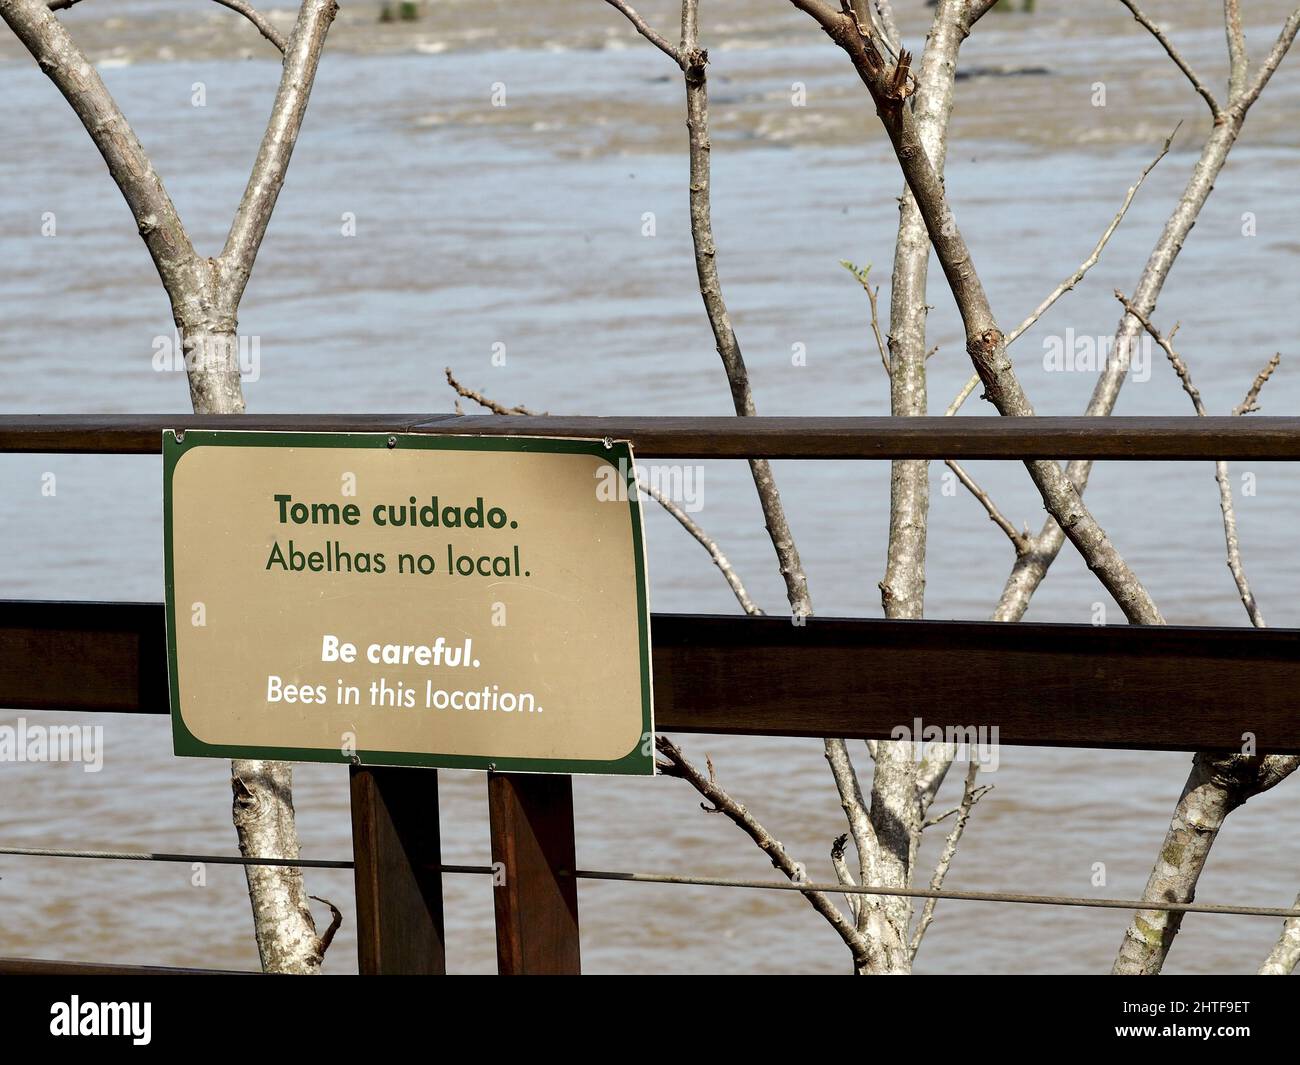 Sign warning about bees in the location in Itaipu Dam, Brazil Stock Photo